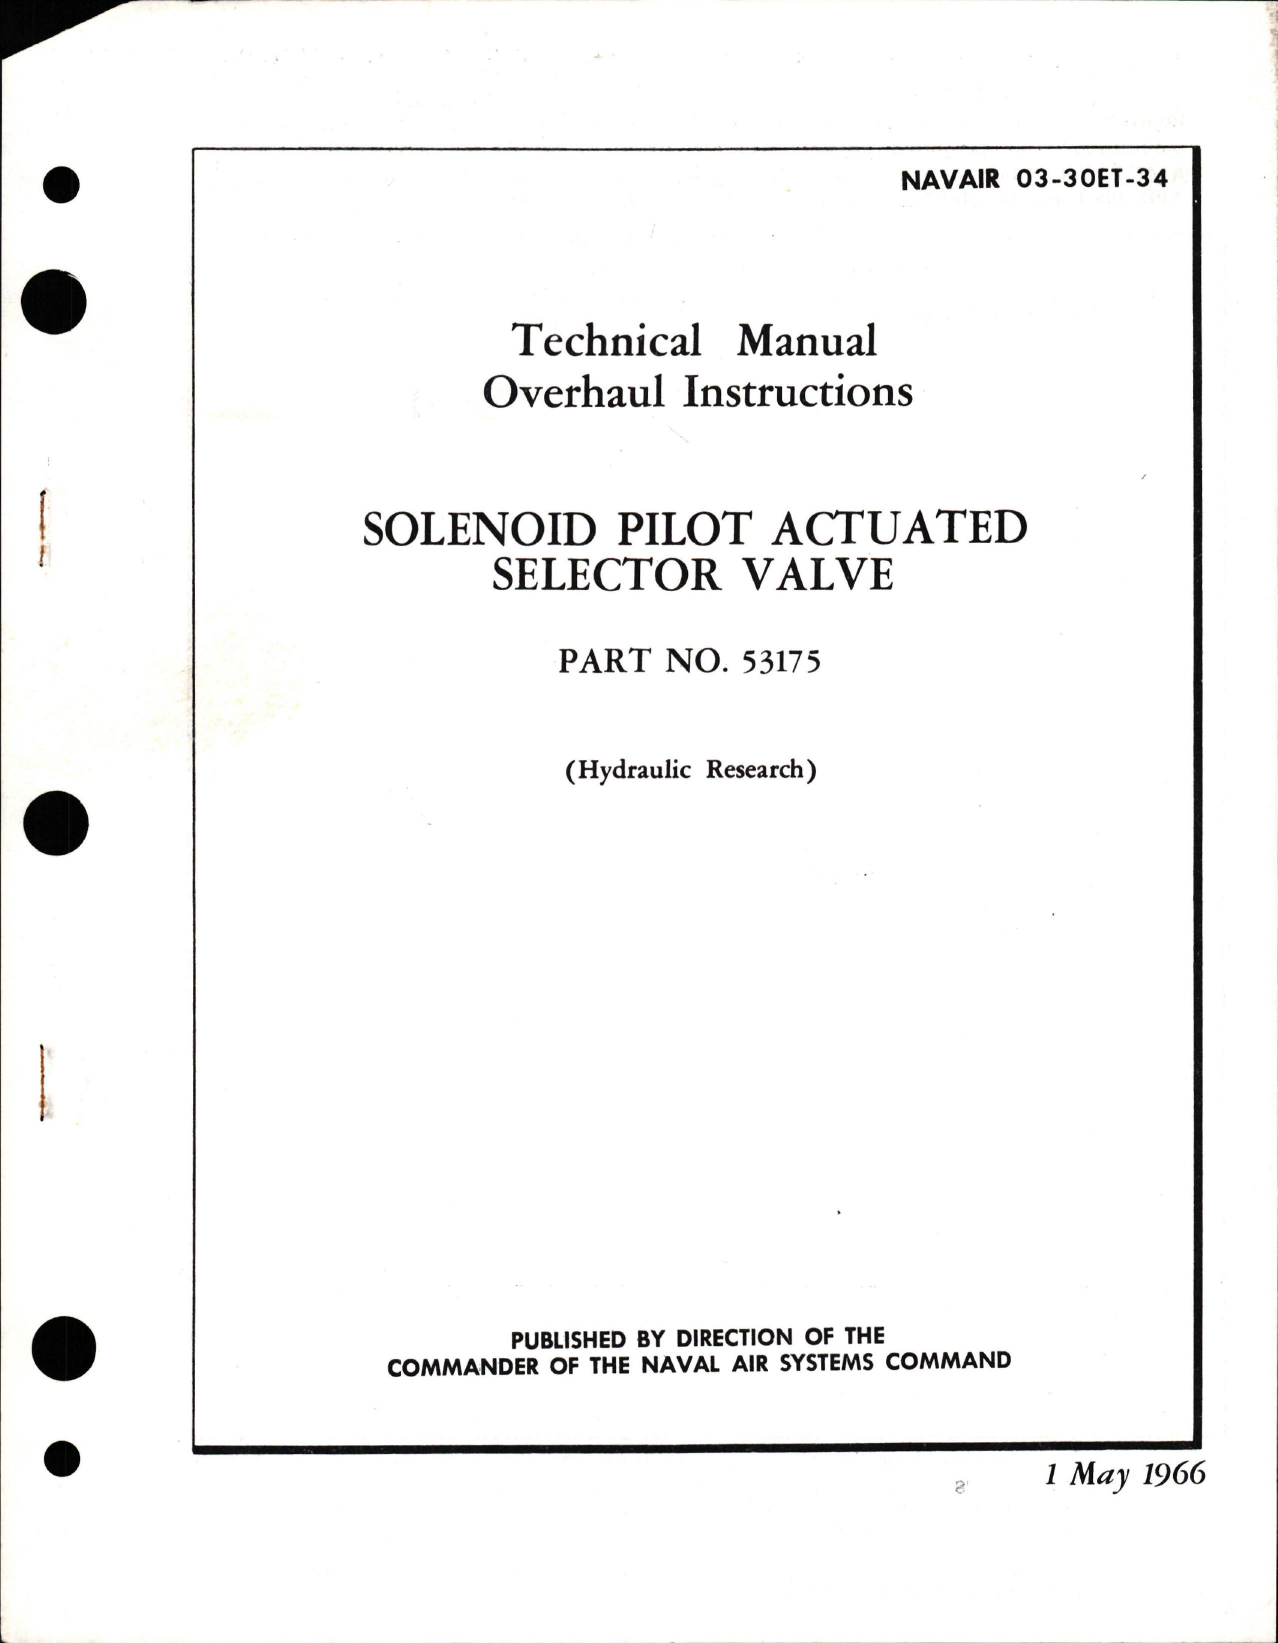 Sample page 1 from AirCorps Library document: Overhaul Instructions for Solenoid Pilot Actuated Selector Valve - Part 53175 